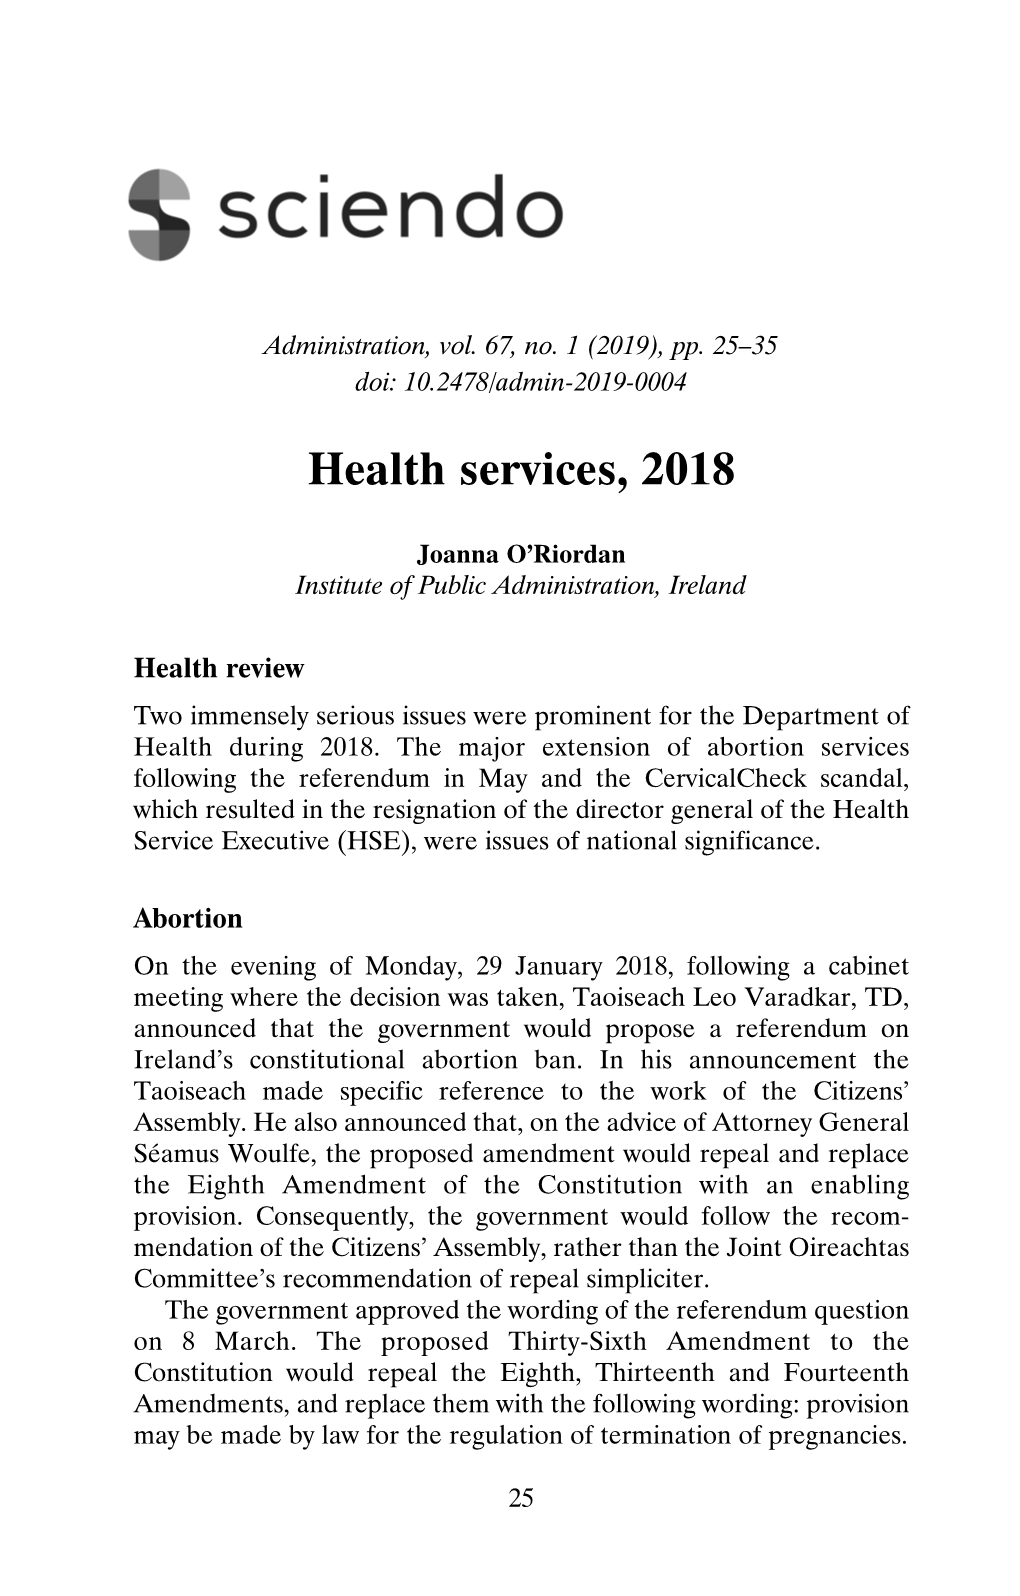 Health Services, 2018